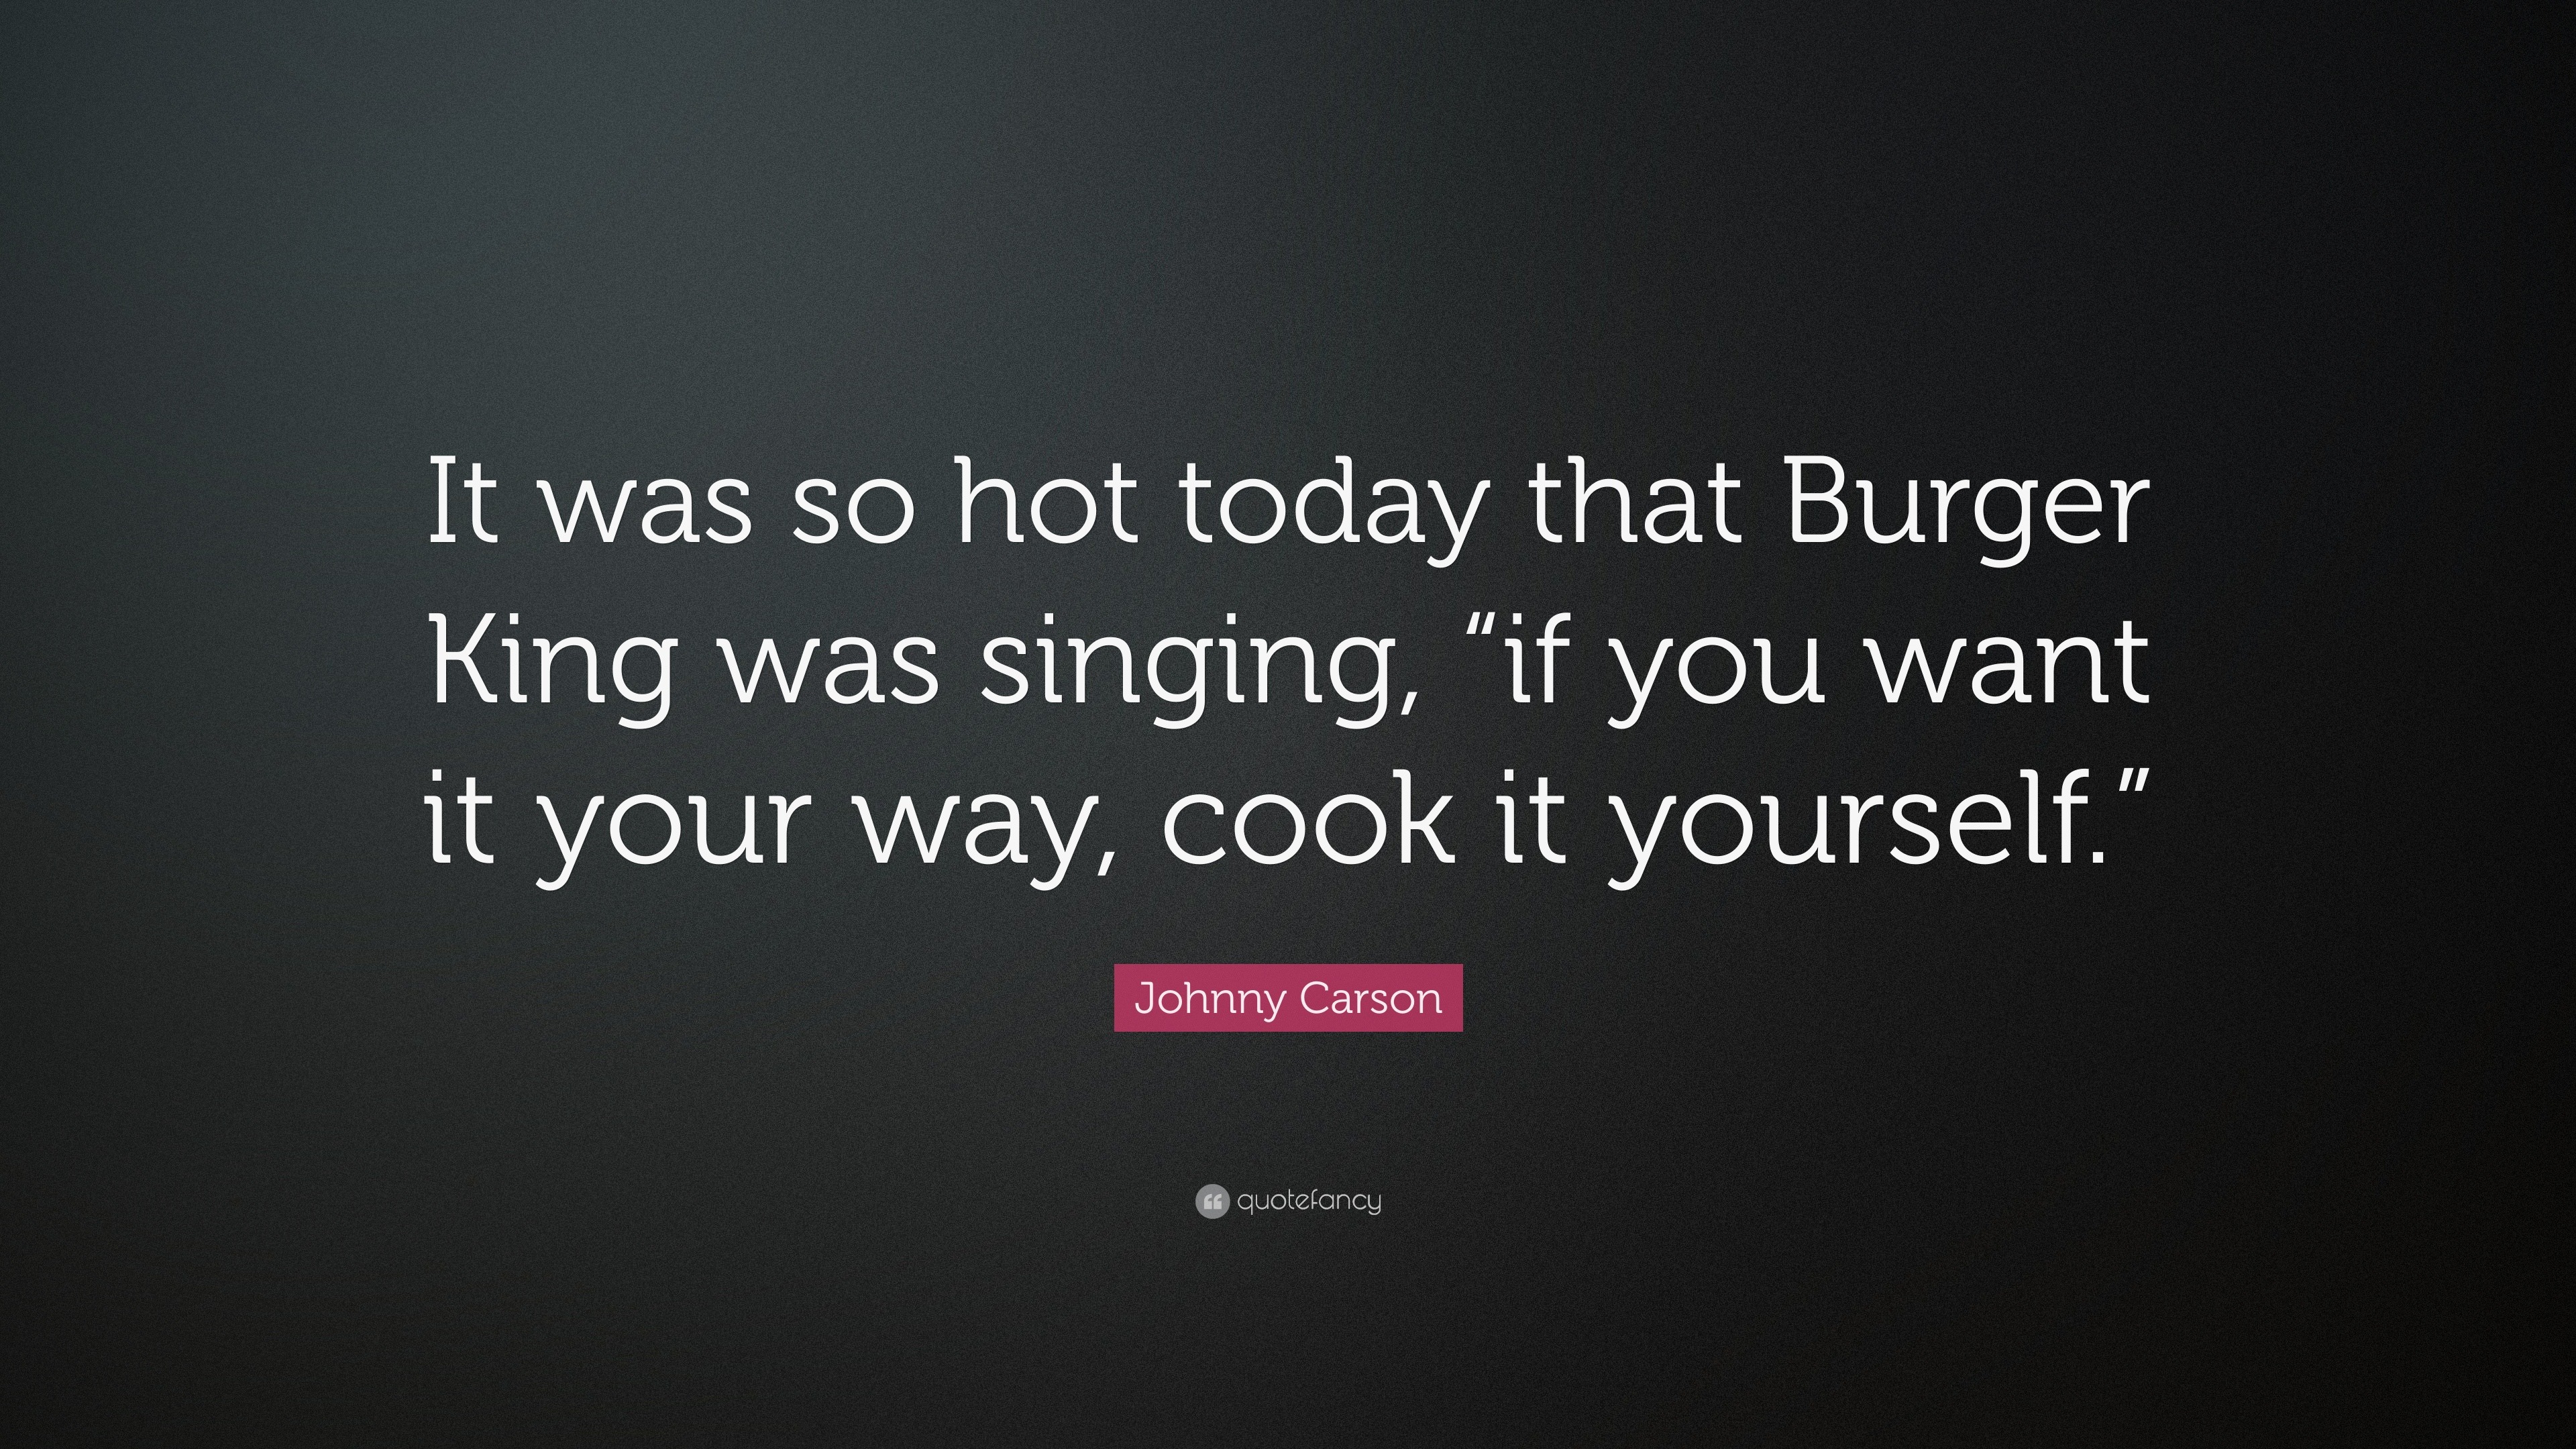 Johnny Carson Quote: “It Was So Hot Today That Burger King Was Singing, “If You Want